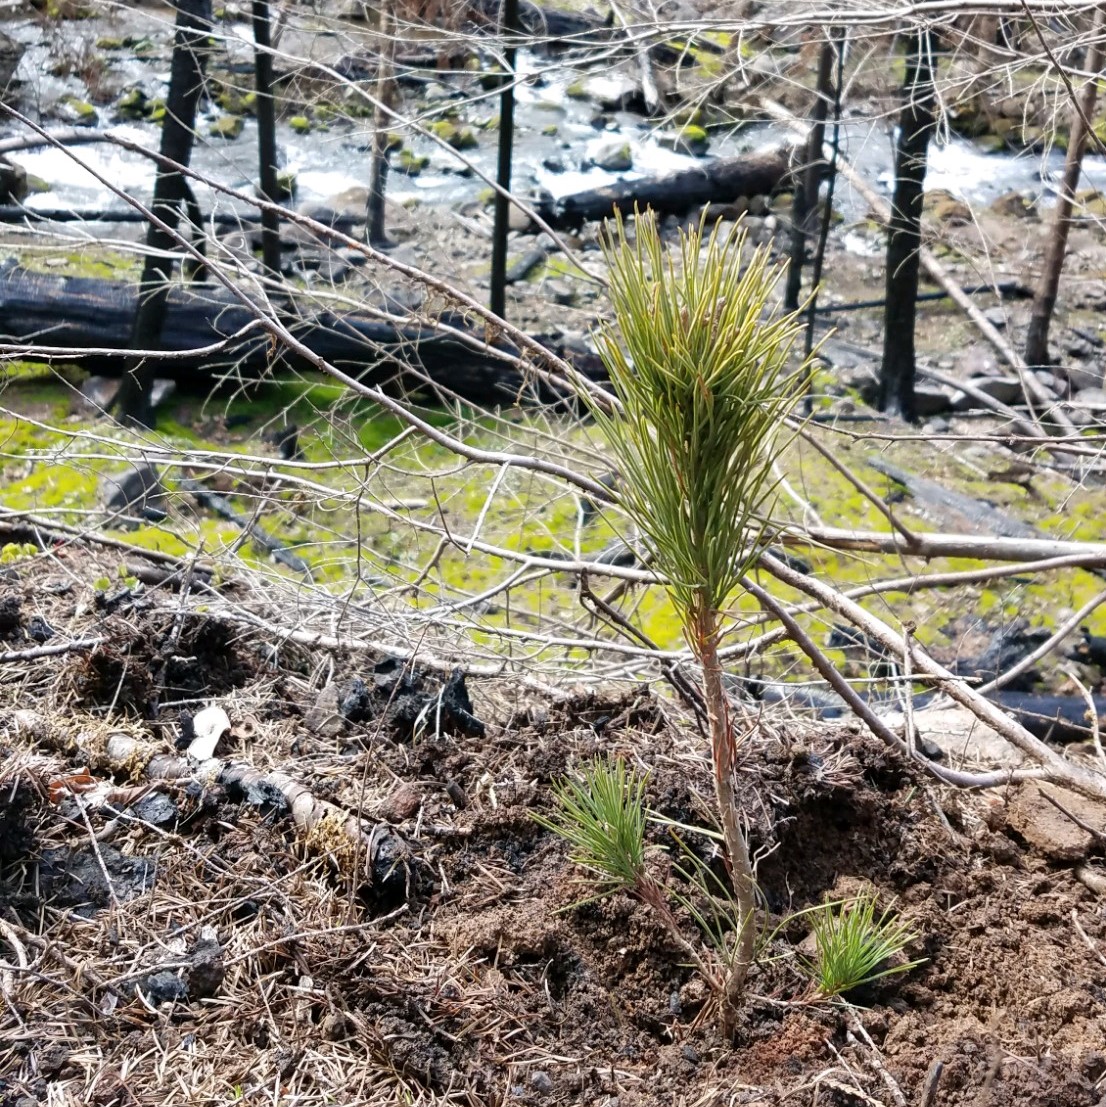 A picture of a small tree seedling.